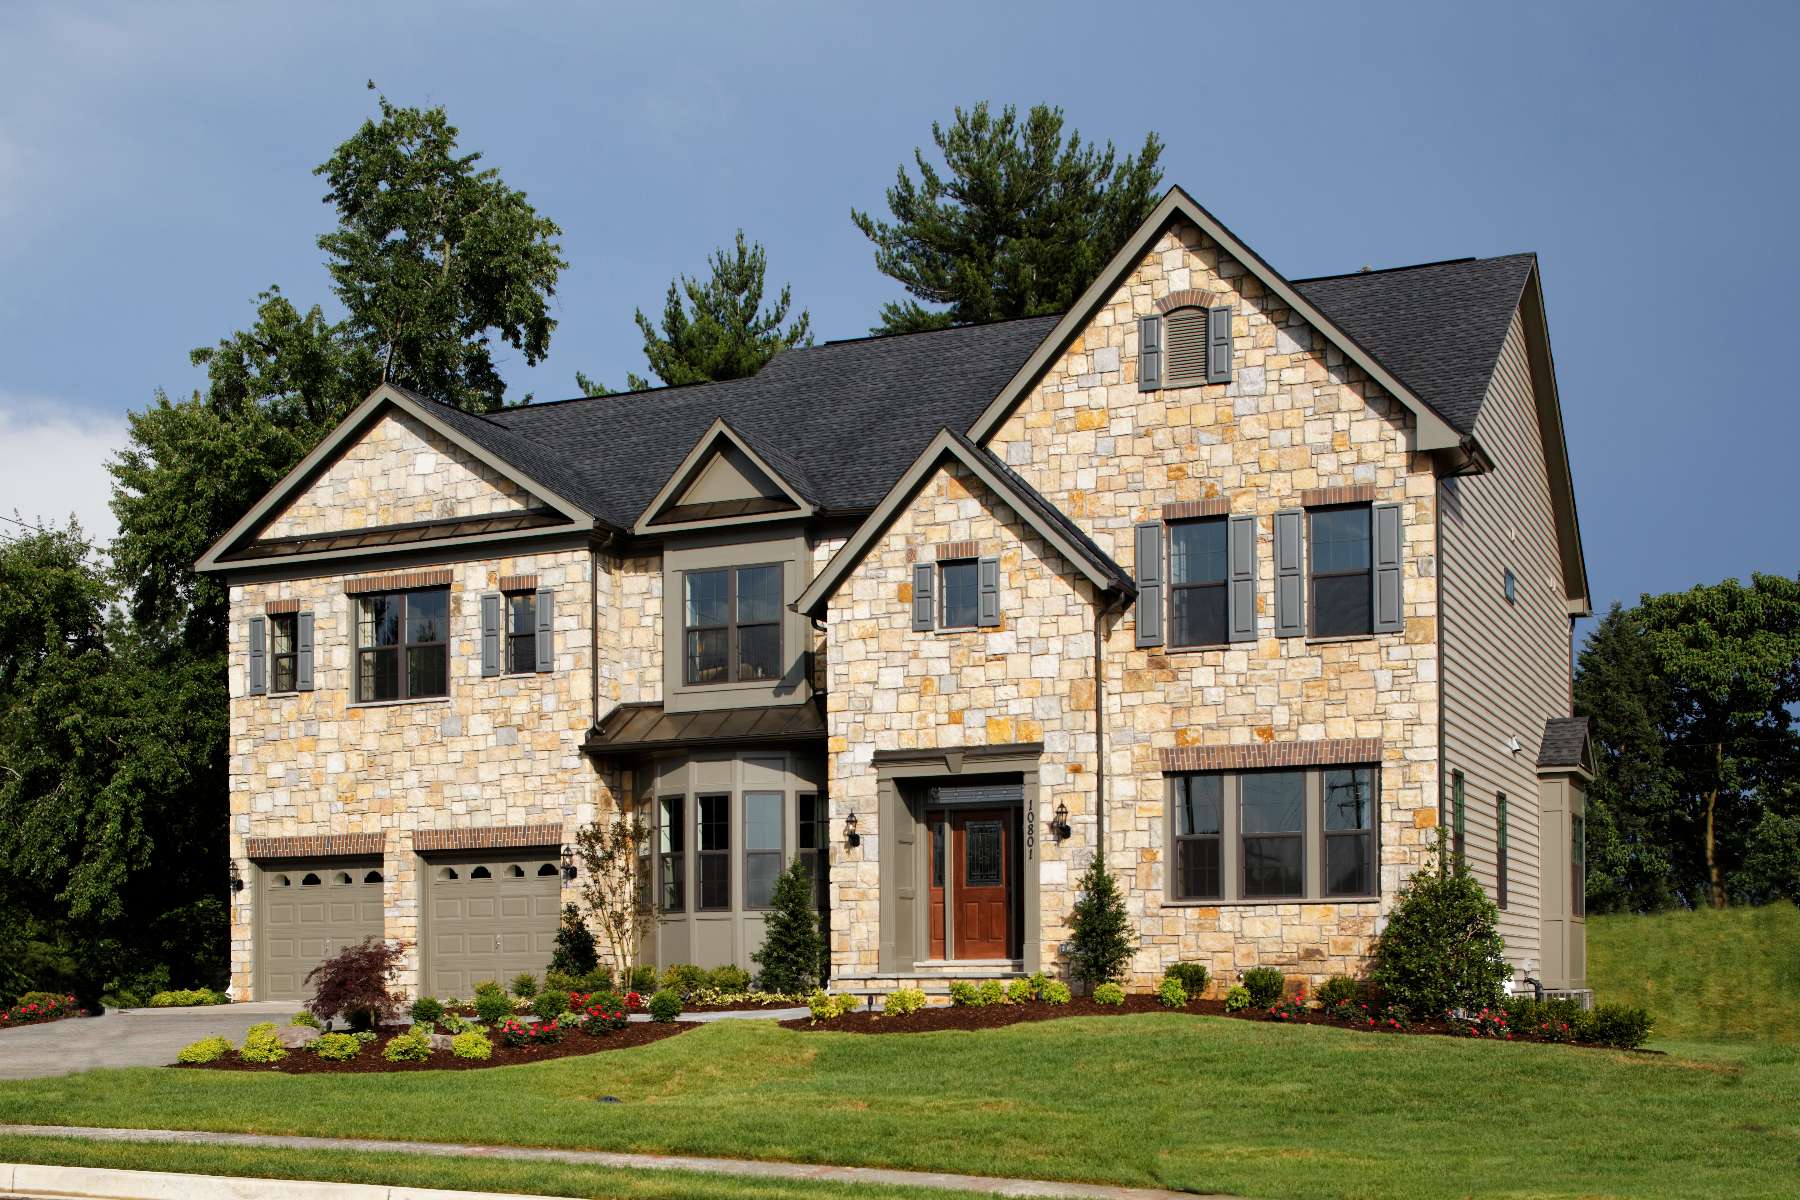 Exteriors Gallery, New Homes in Maryland, Virginia, Washington D.C.